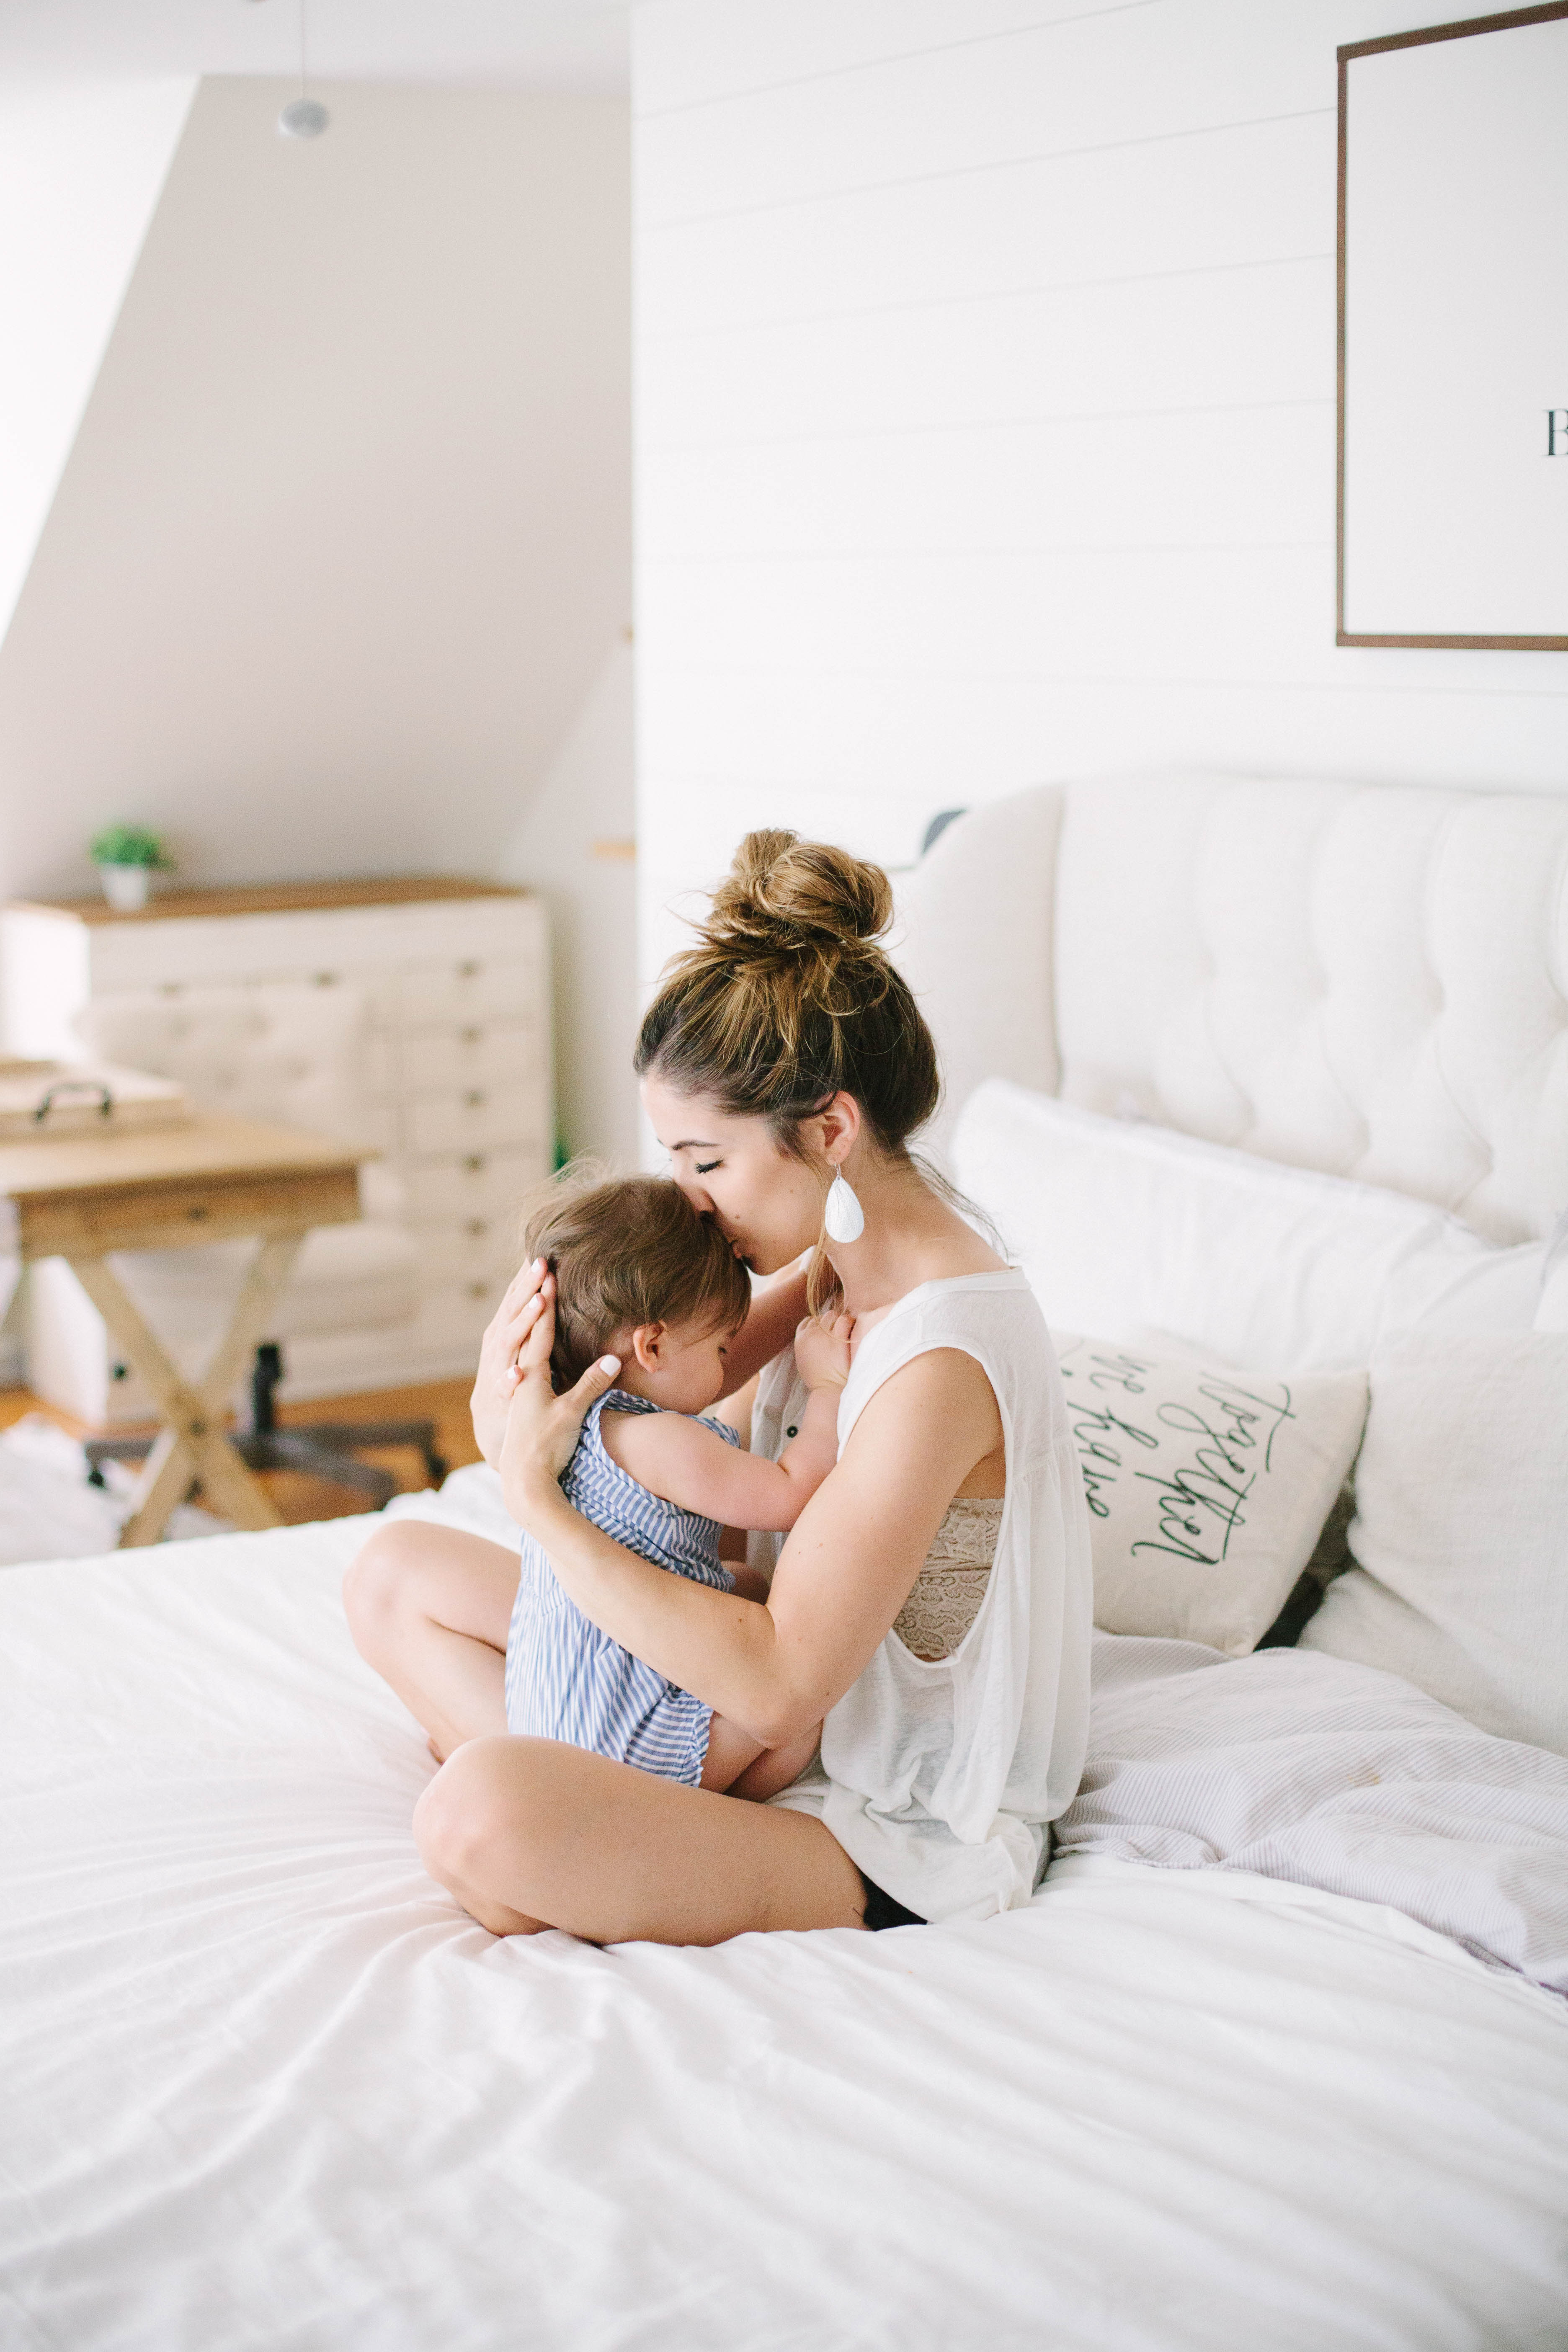 Busy mom and looking to cut down on your morning routine? Check out this 5 Minute Mom Skincare Routine featuring one product that does 4 steps in 1!